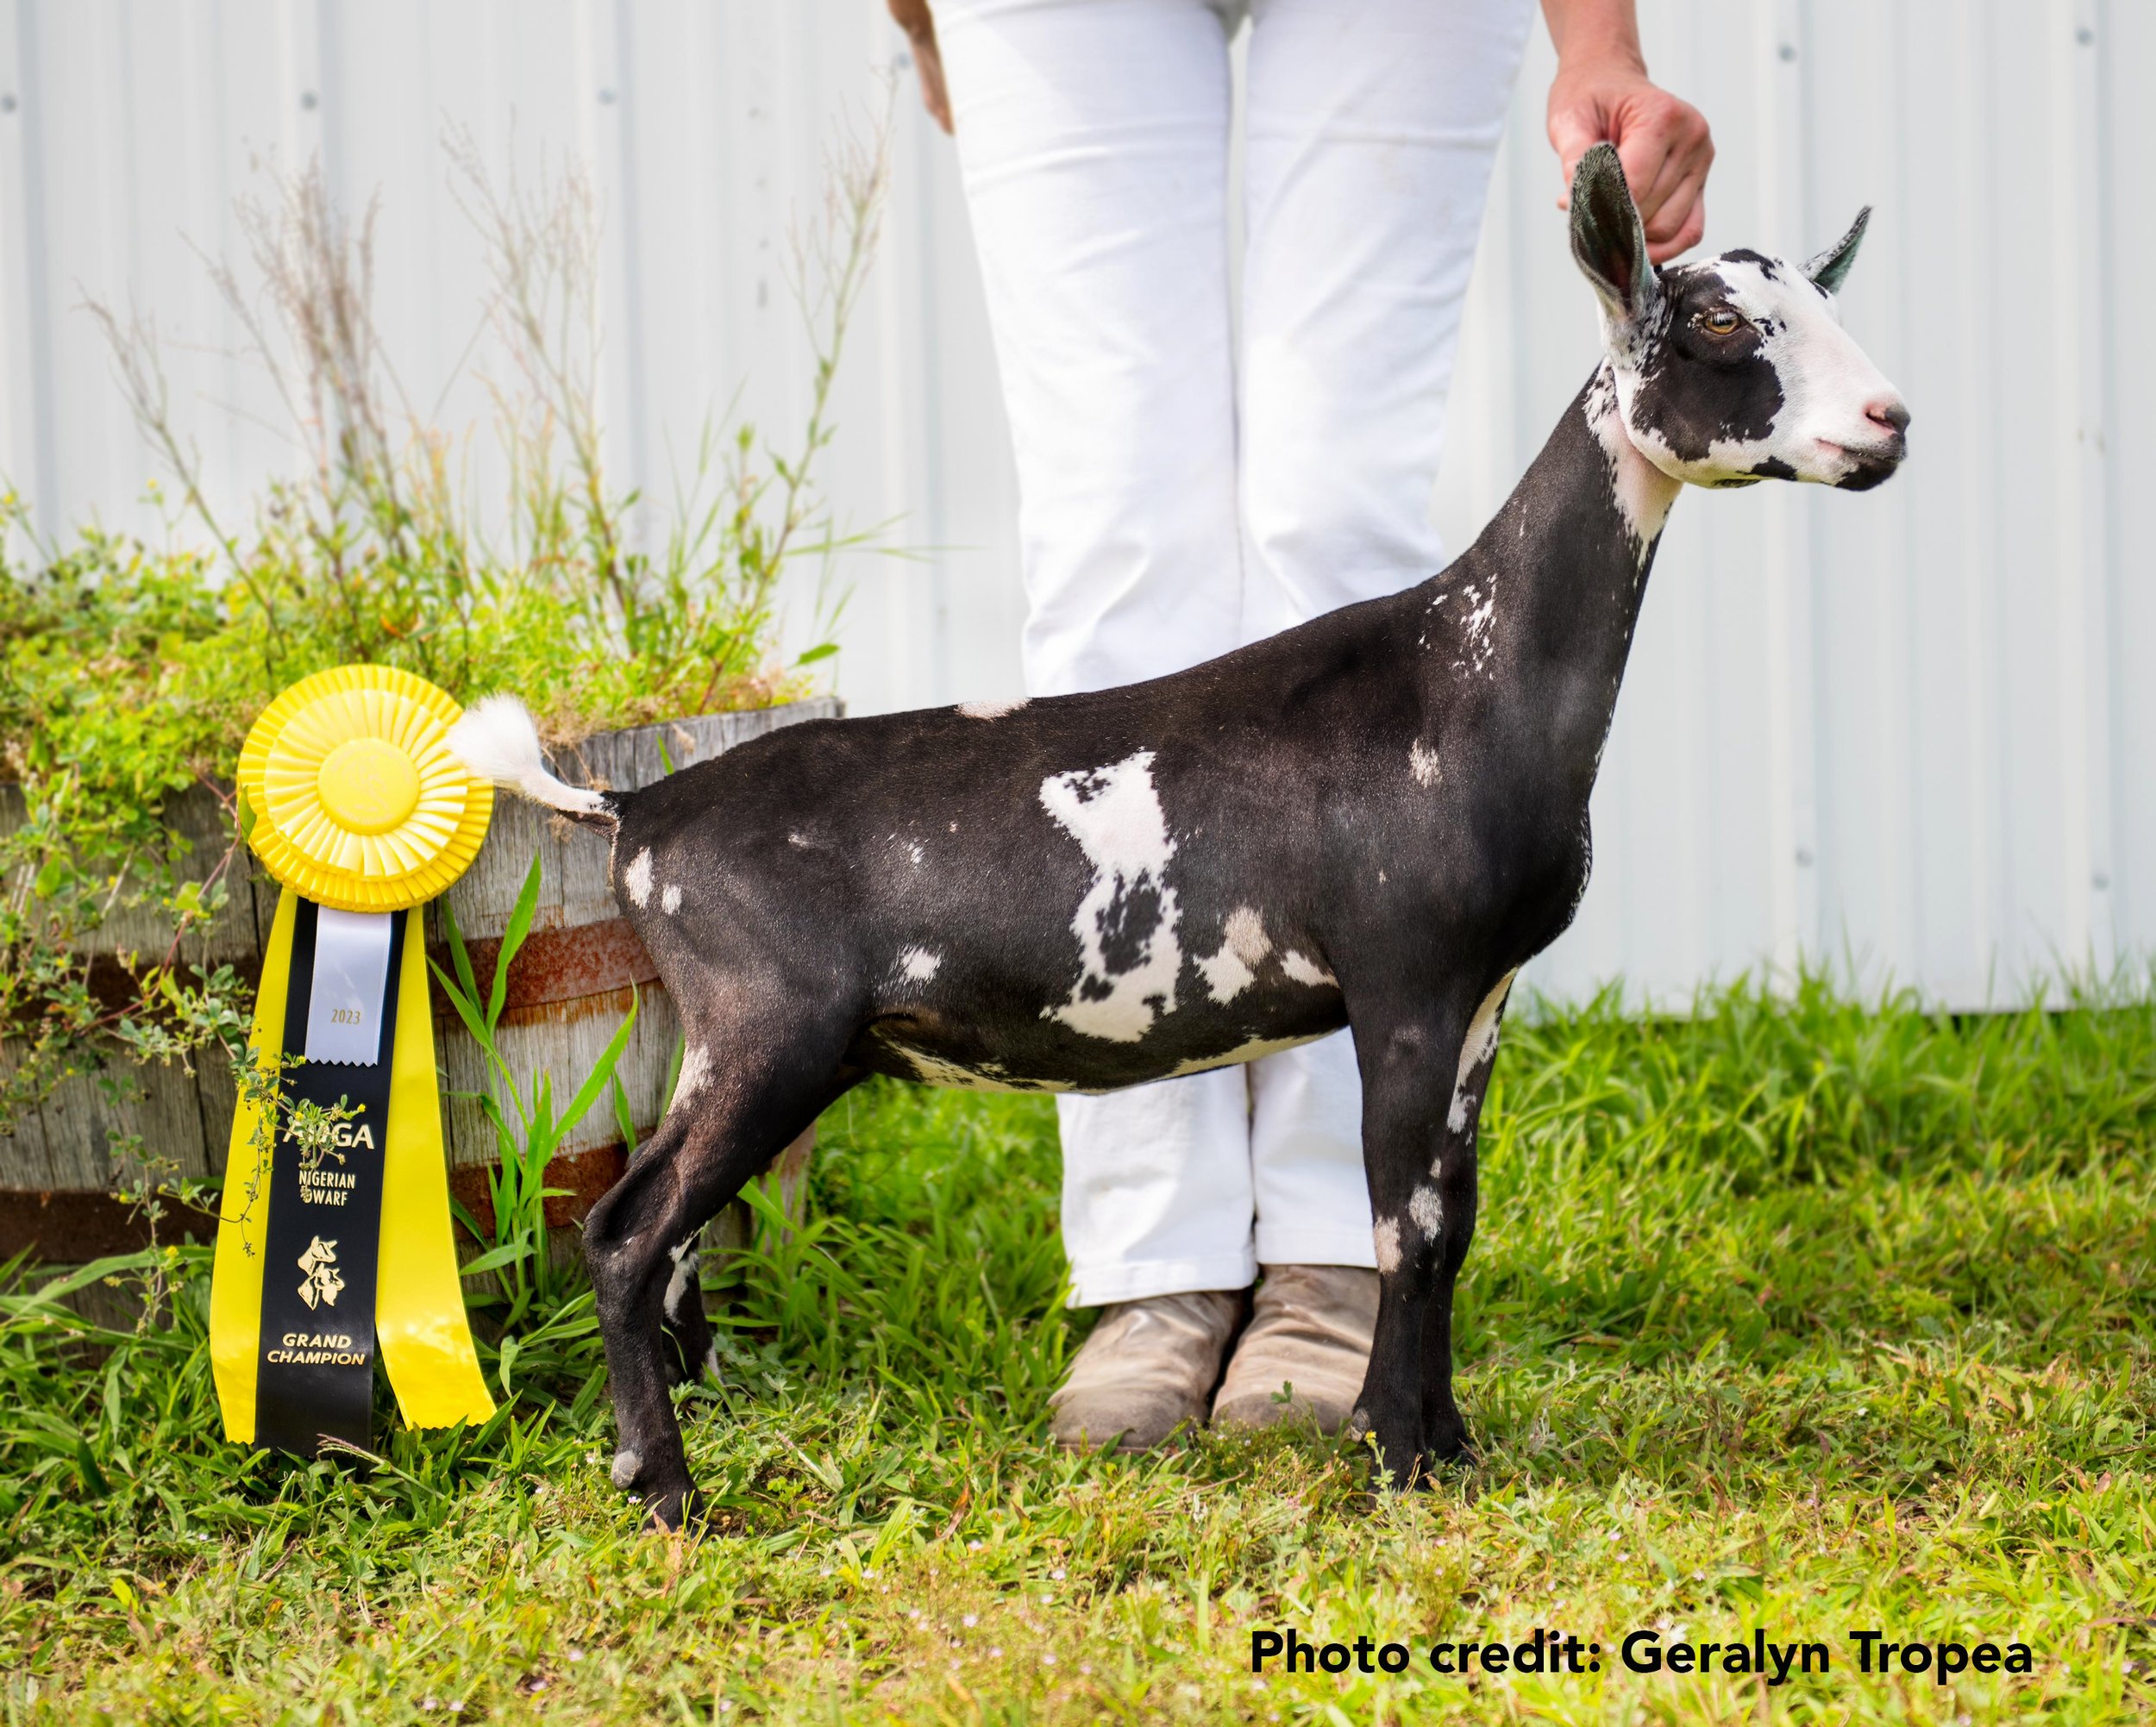 Fancy Jane @ 4 months old: Grand Champion at her first show